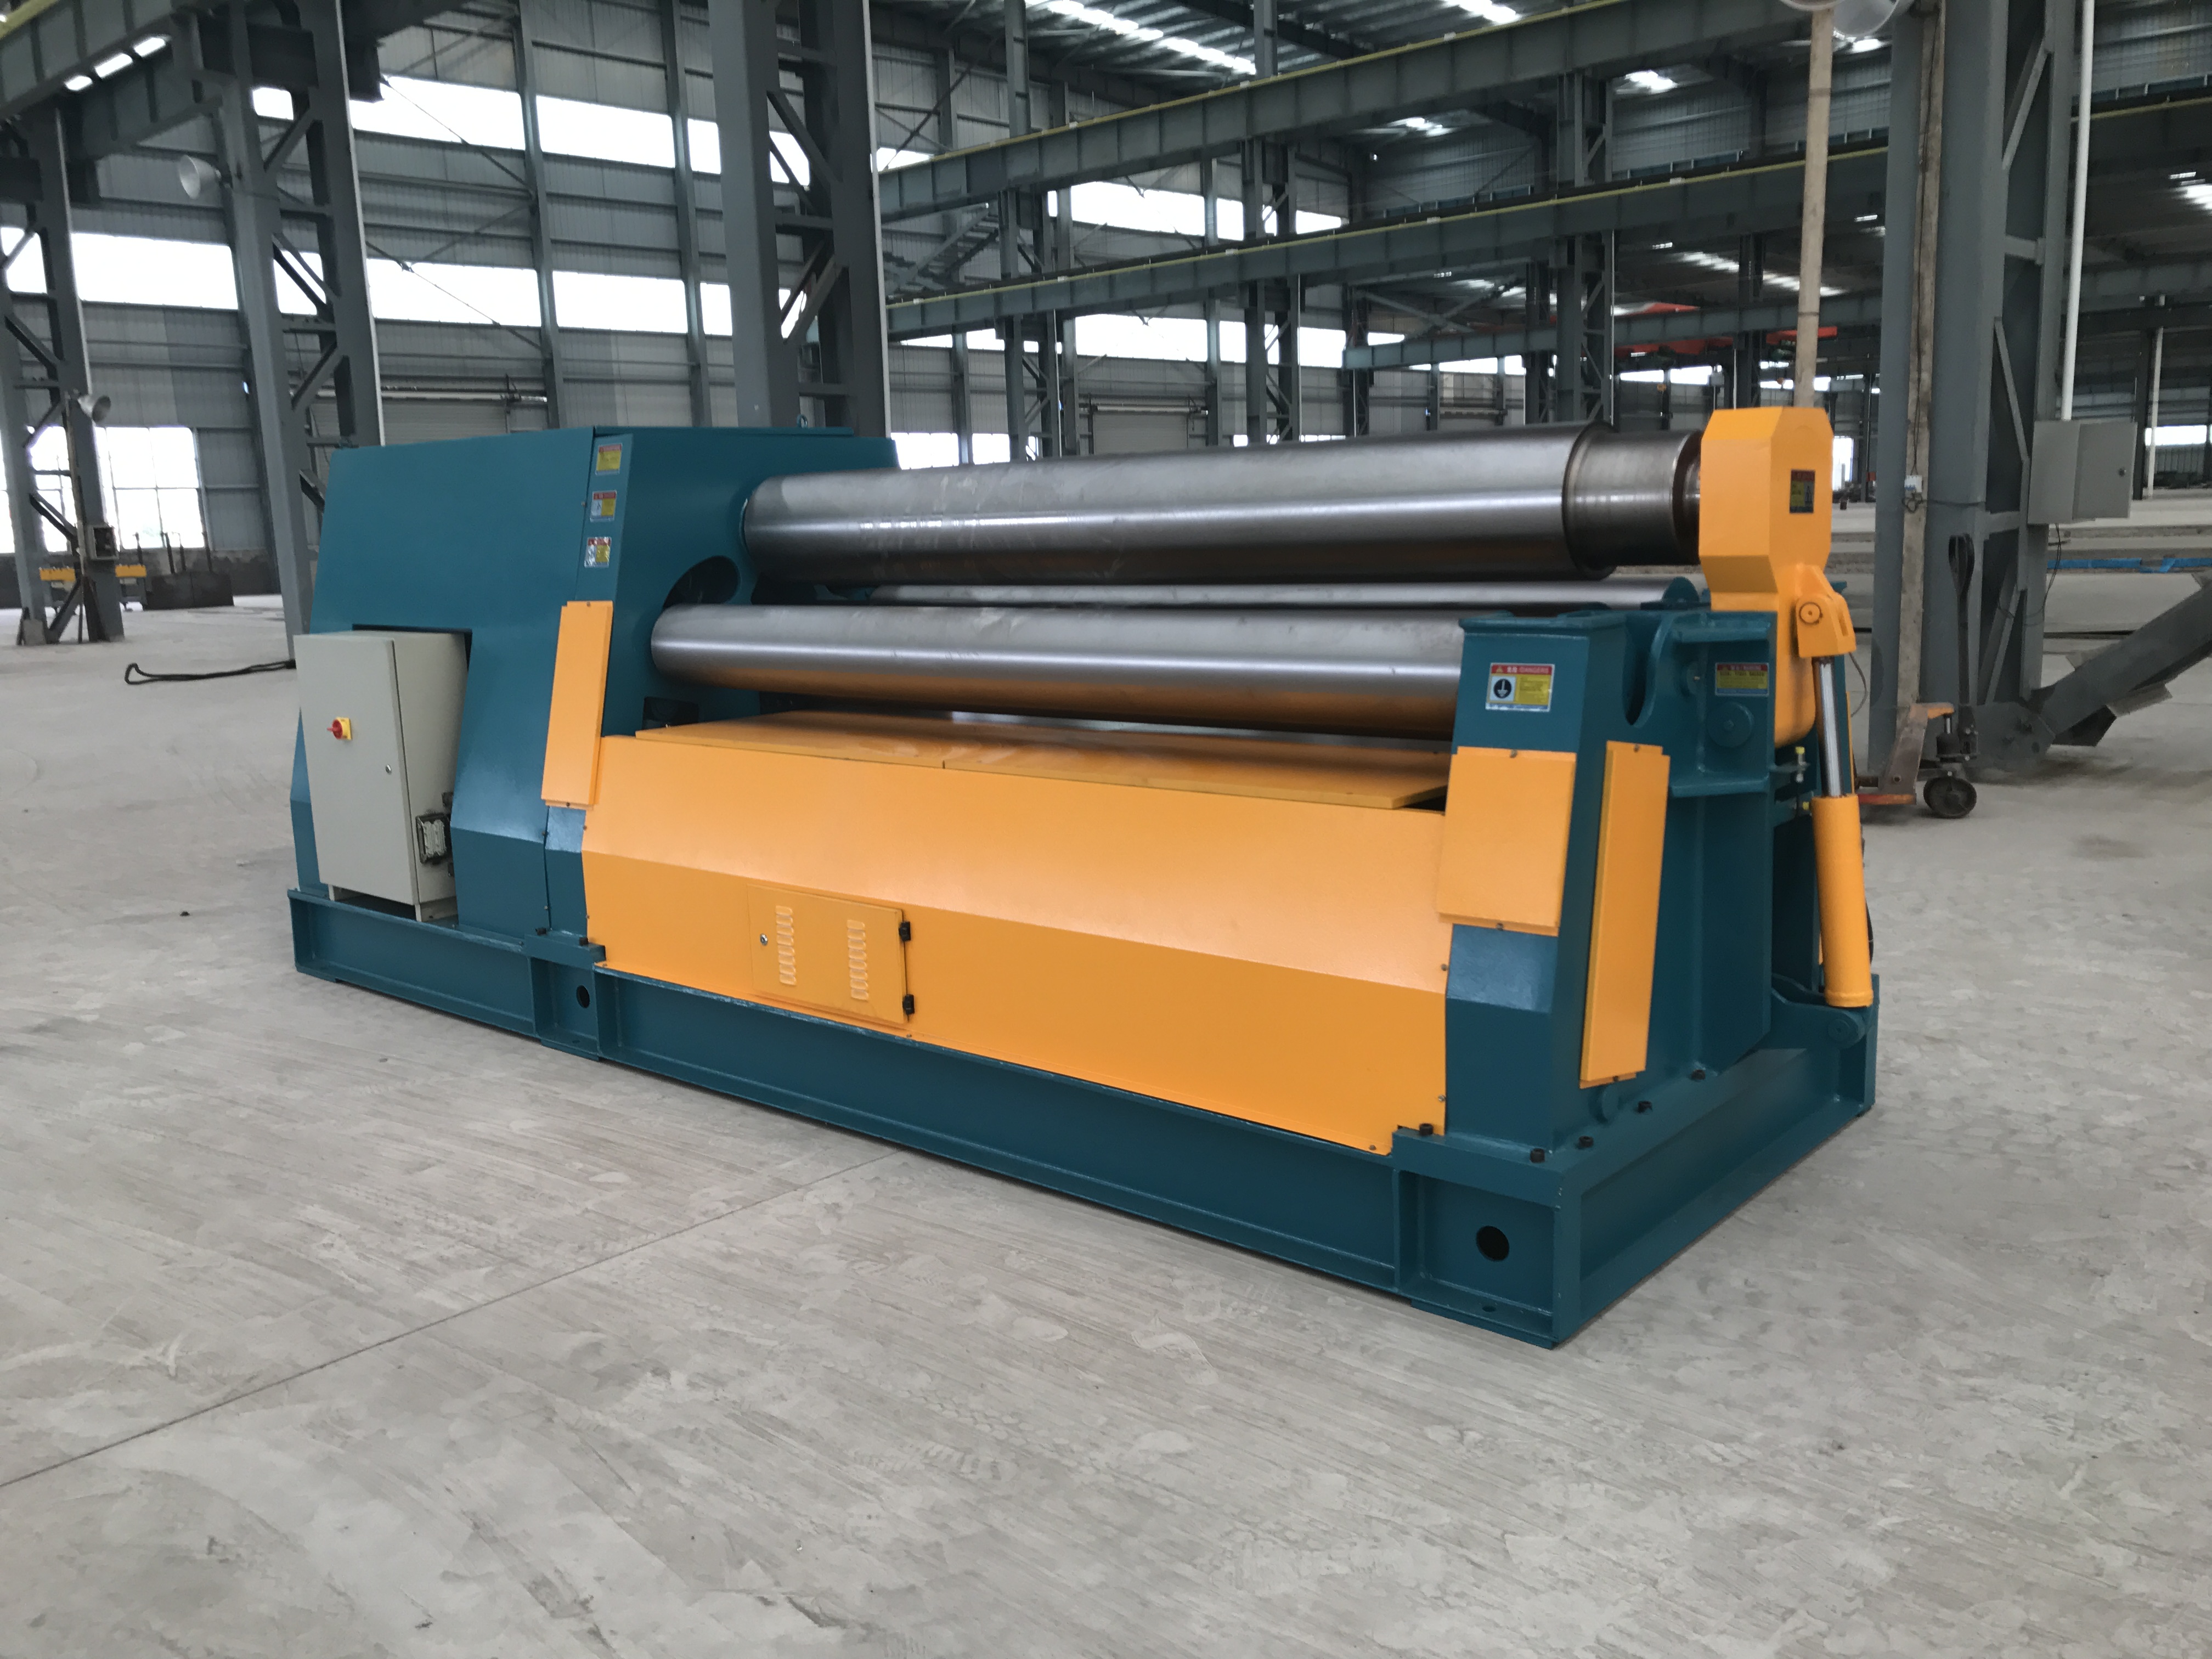 FOUR ROLLER ROLLING MACHINE